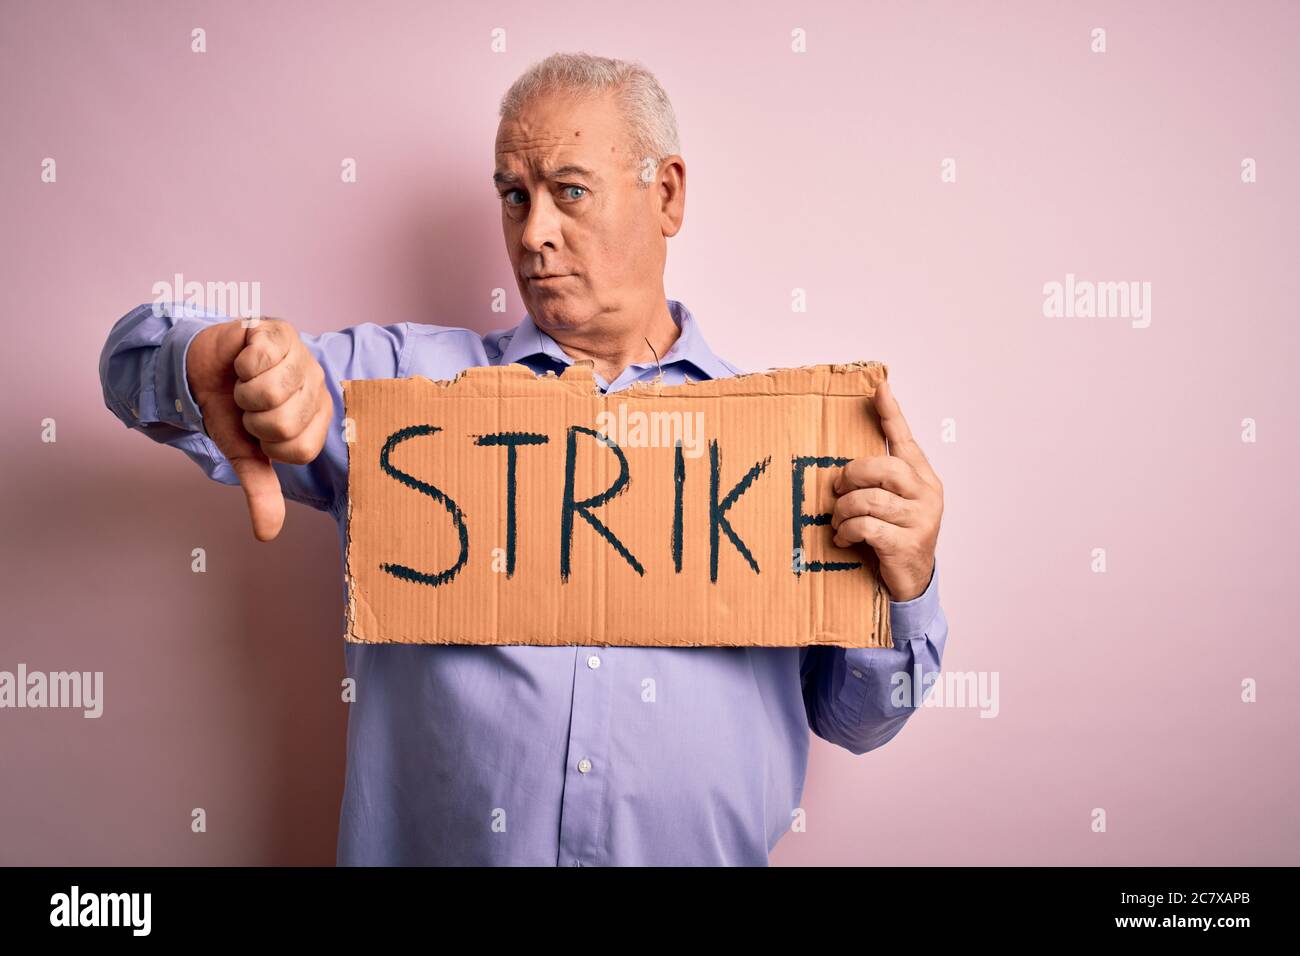 Middle age man asking for rights holding banner with strike message over pink background with angry face, negative sign showing dislike with thumbs do Stock Photo